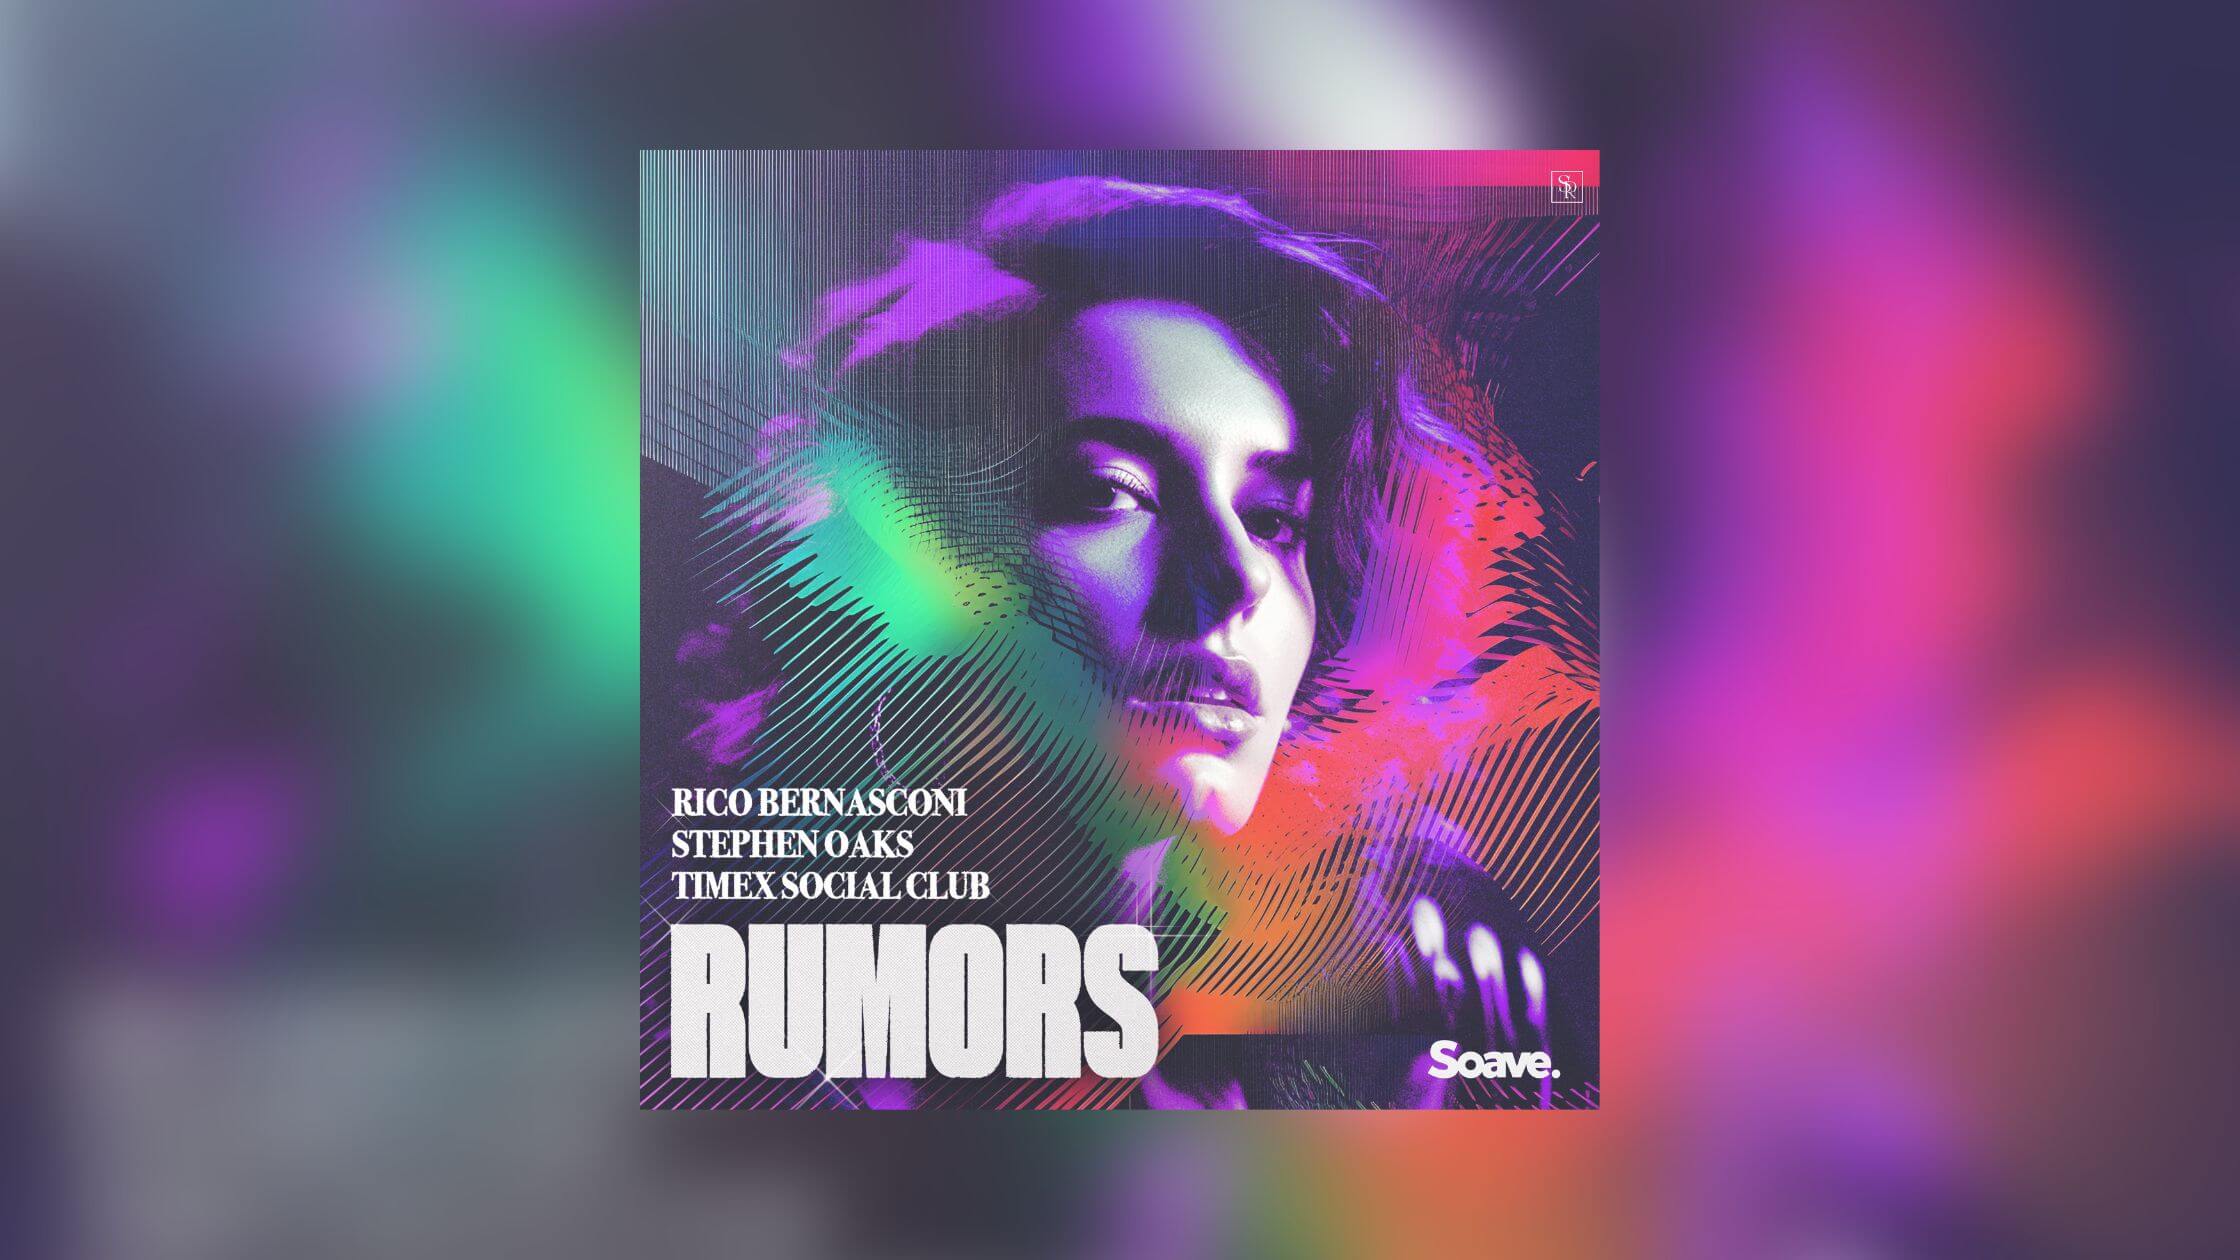 Listen to house remix of “Rumors” by Timex Social Club and go back in time in style